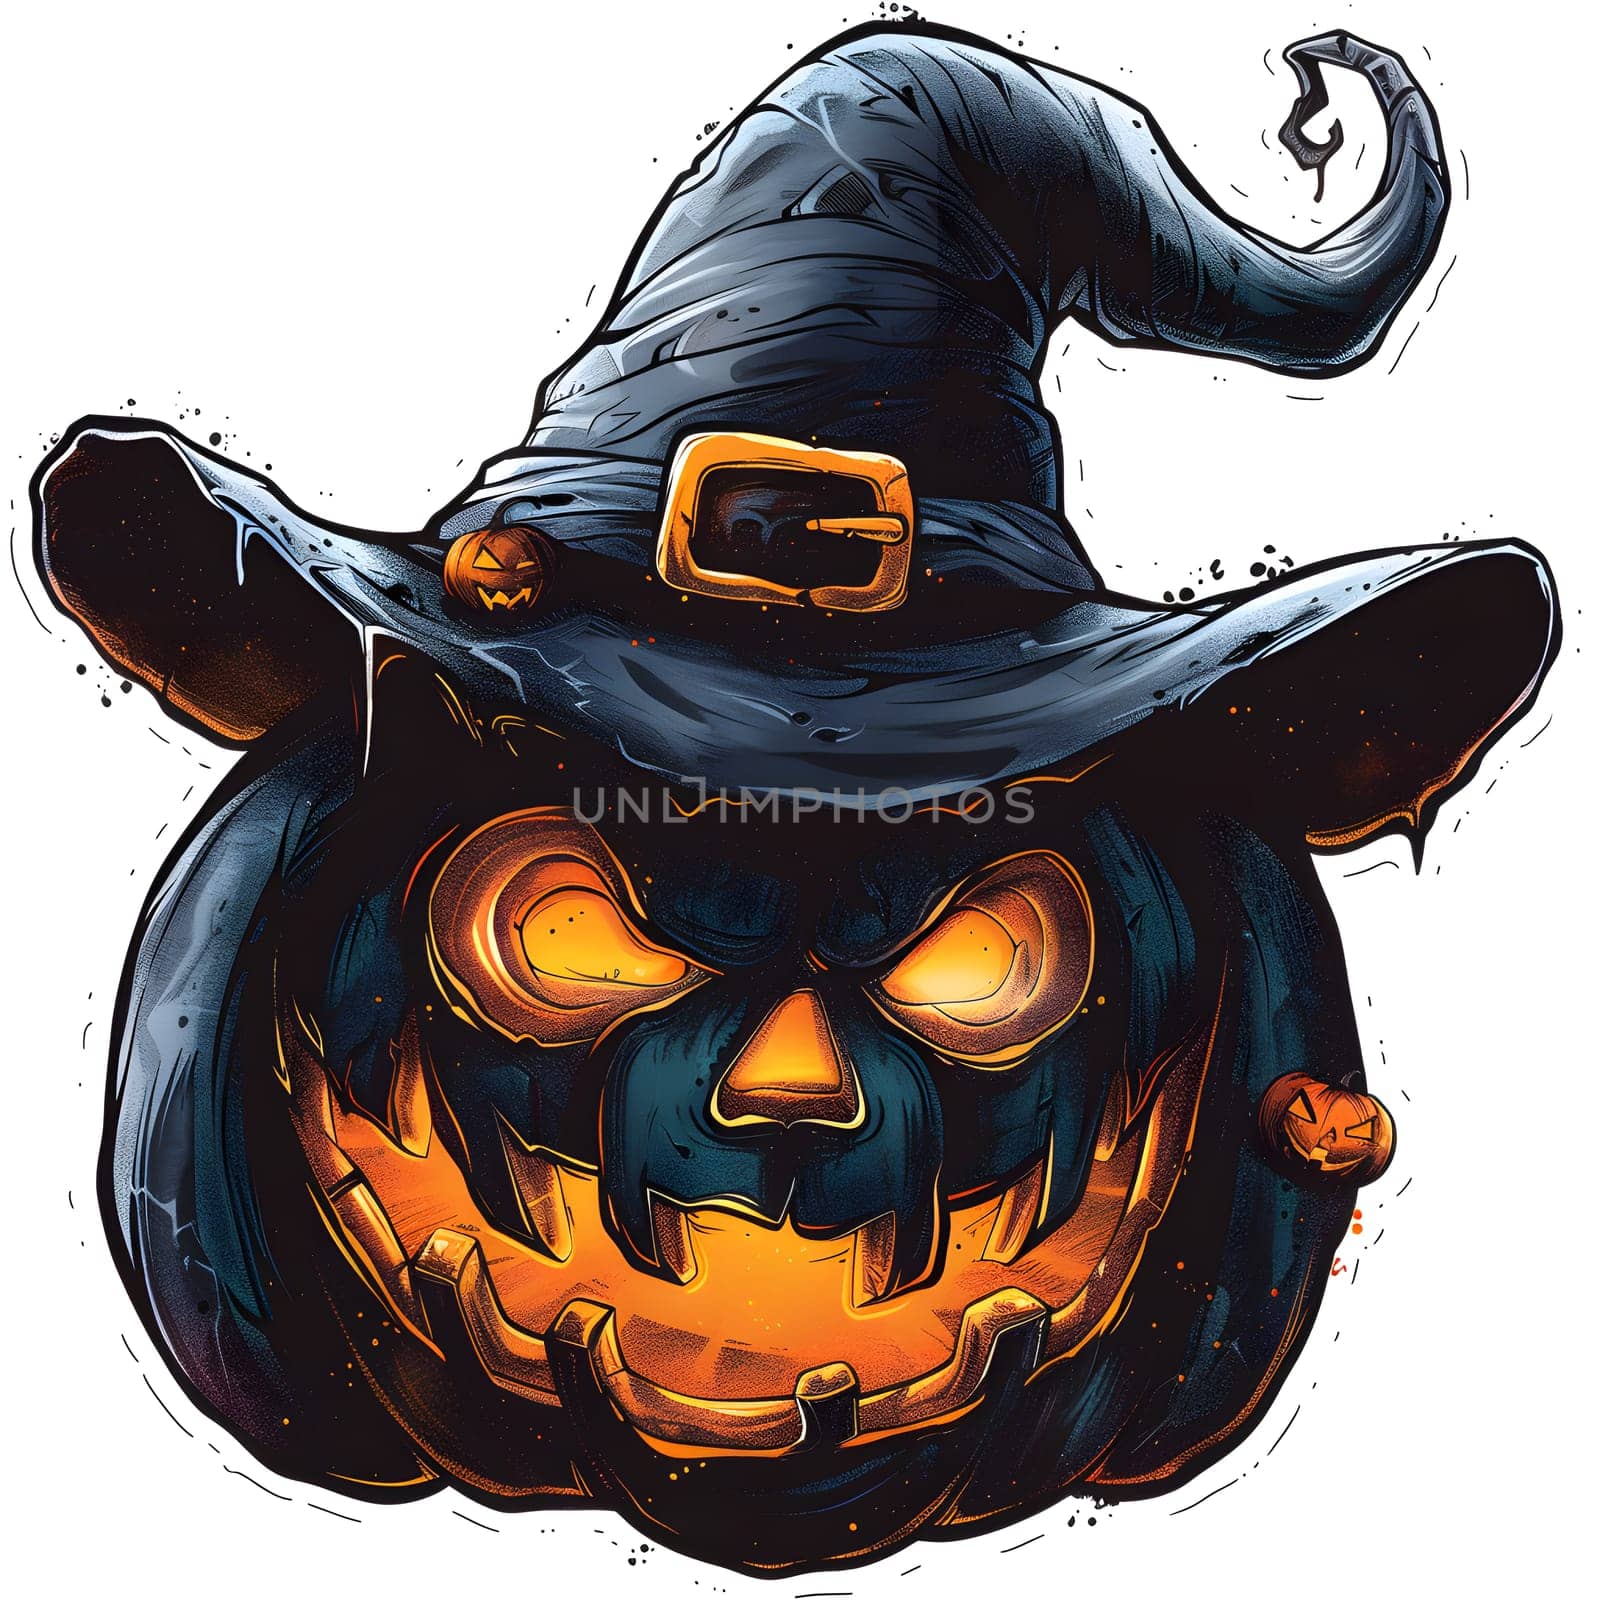 A Calabaza painted with a witch hat on its head, resembling a fictional character. The art depicts a working animal with a spooky vibe, showcasing creativity and Halloween spirit